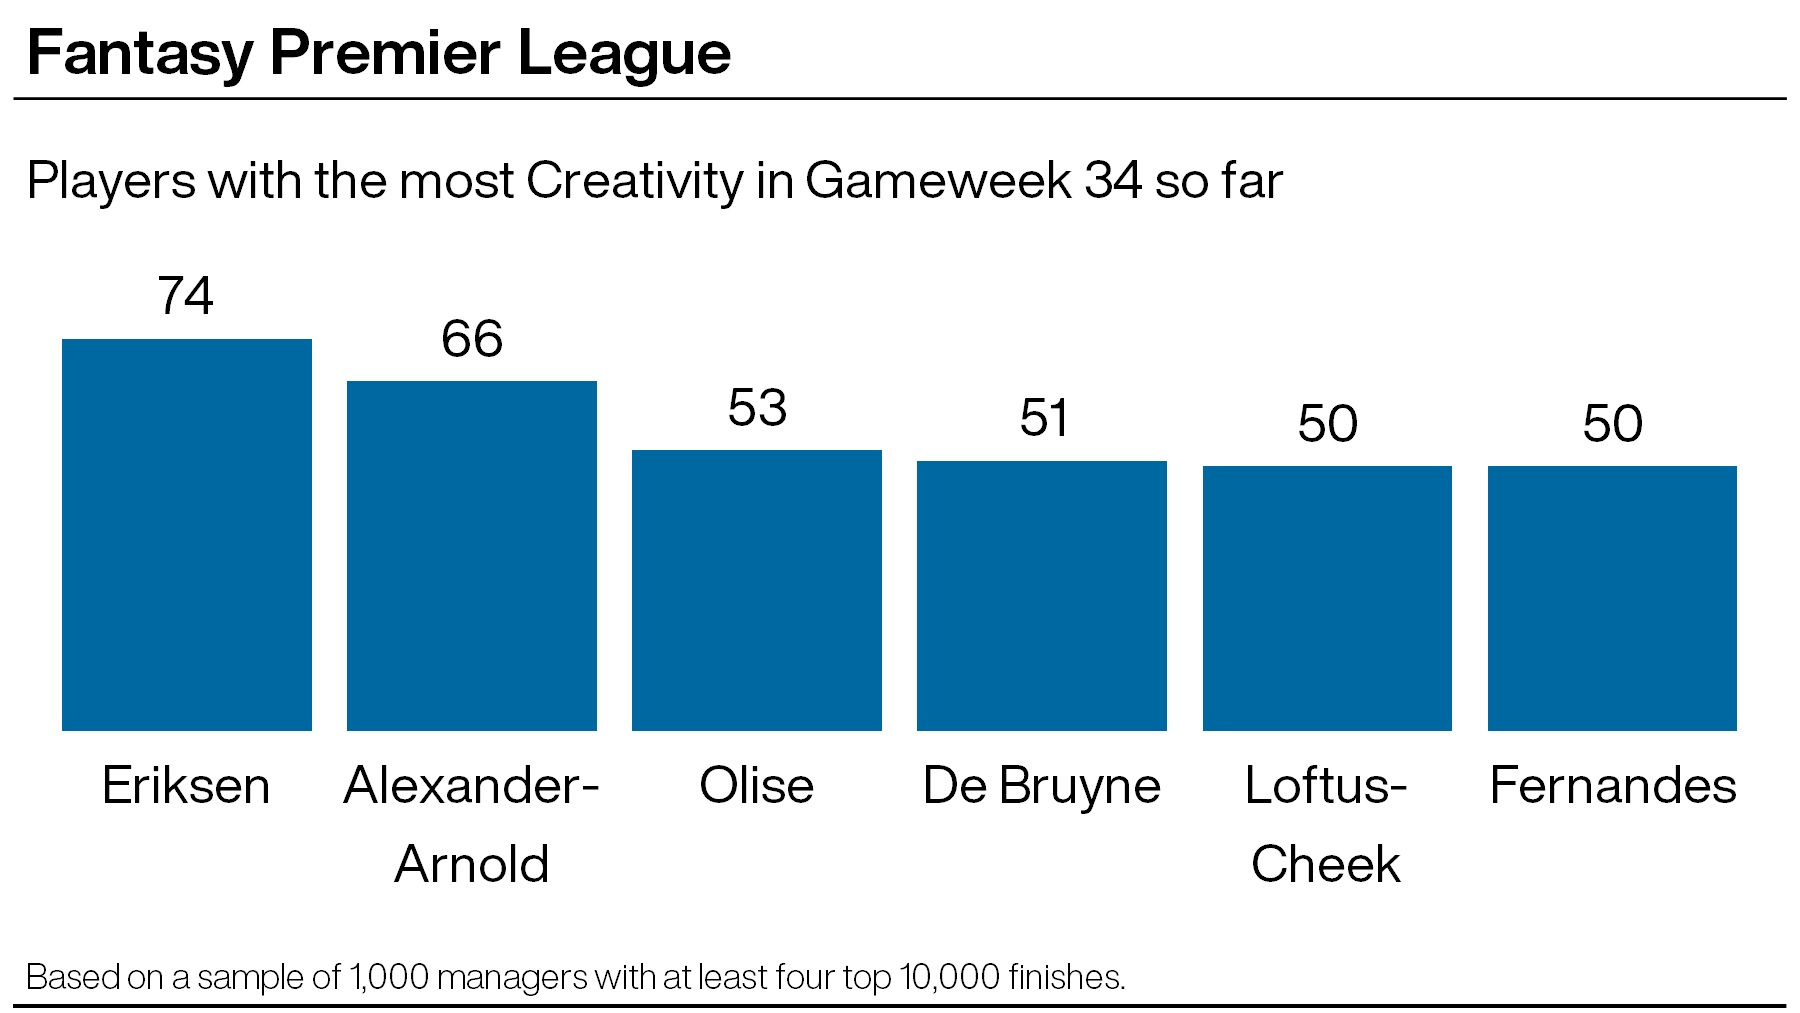 A graphic showing some of the most creative footballers in the Premier League in gameweek 34 according to FPL data